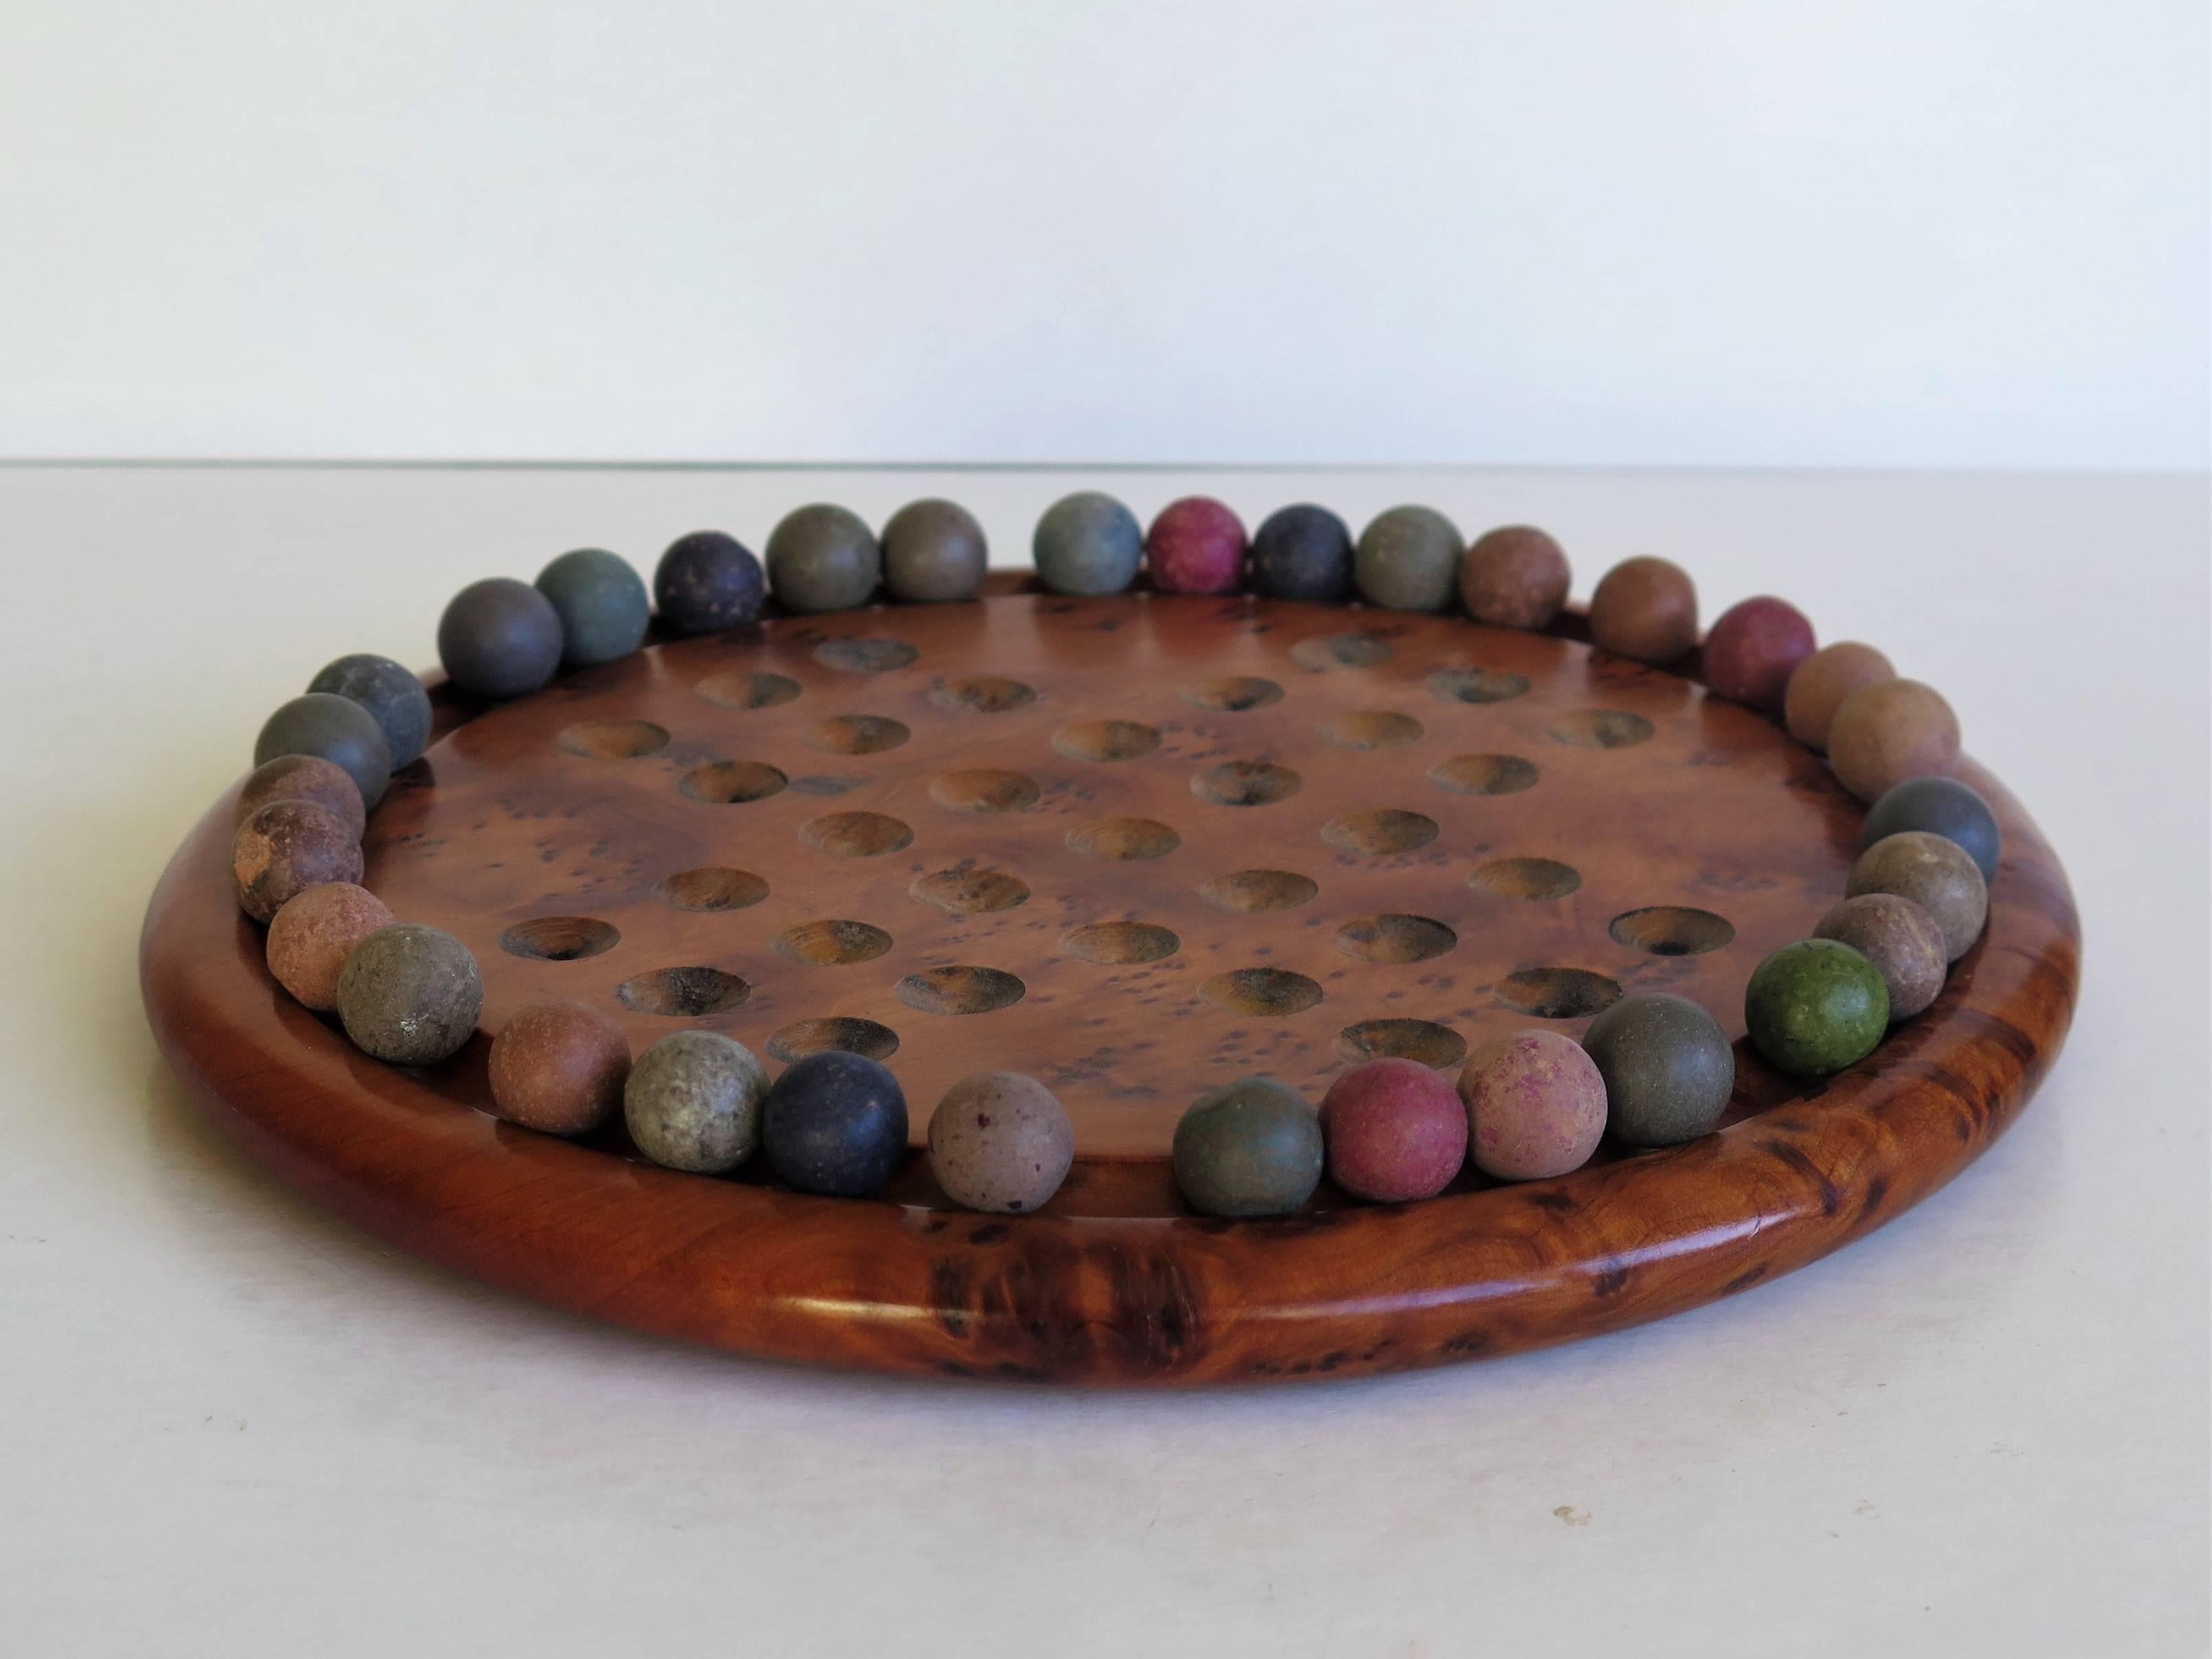 English Marble Solitaire Board Game with 32 Early Handmade Stone Marbles, Ca 1900